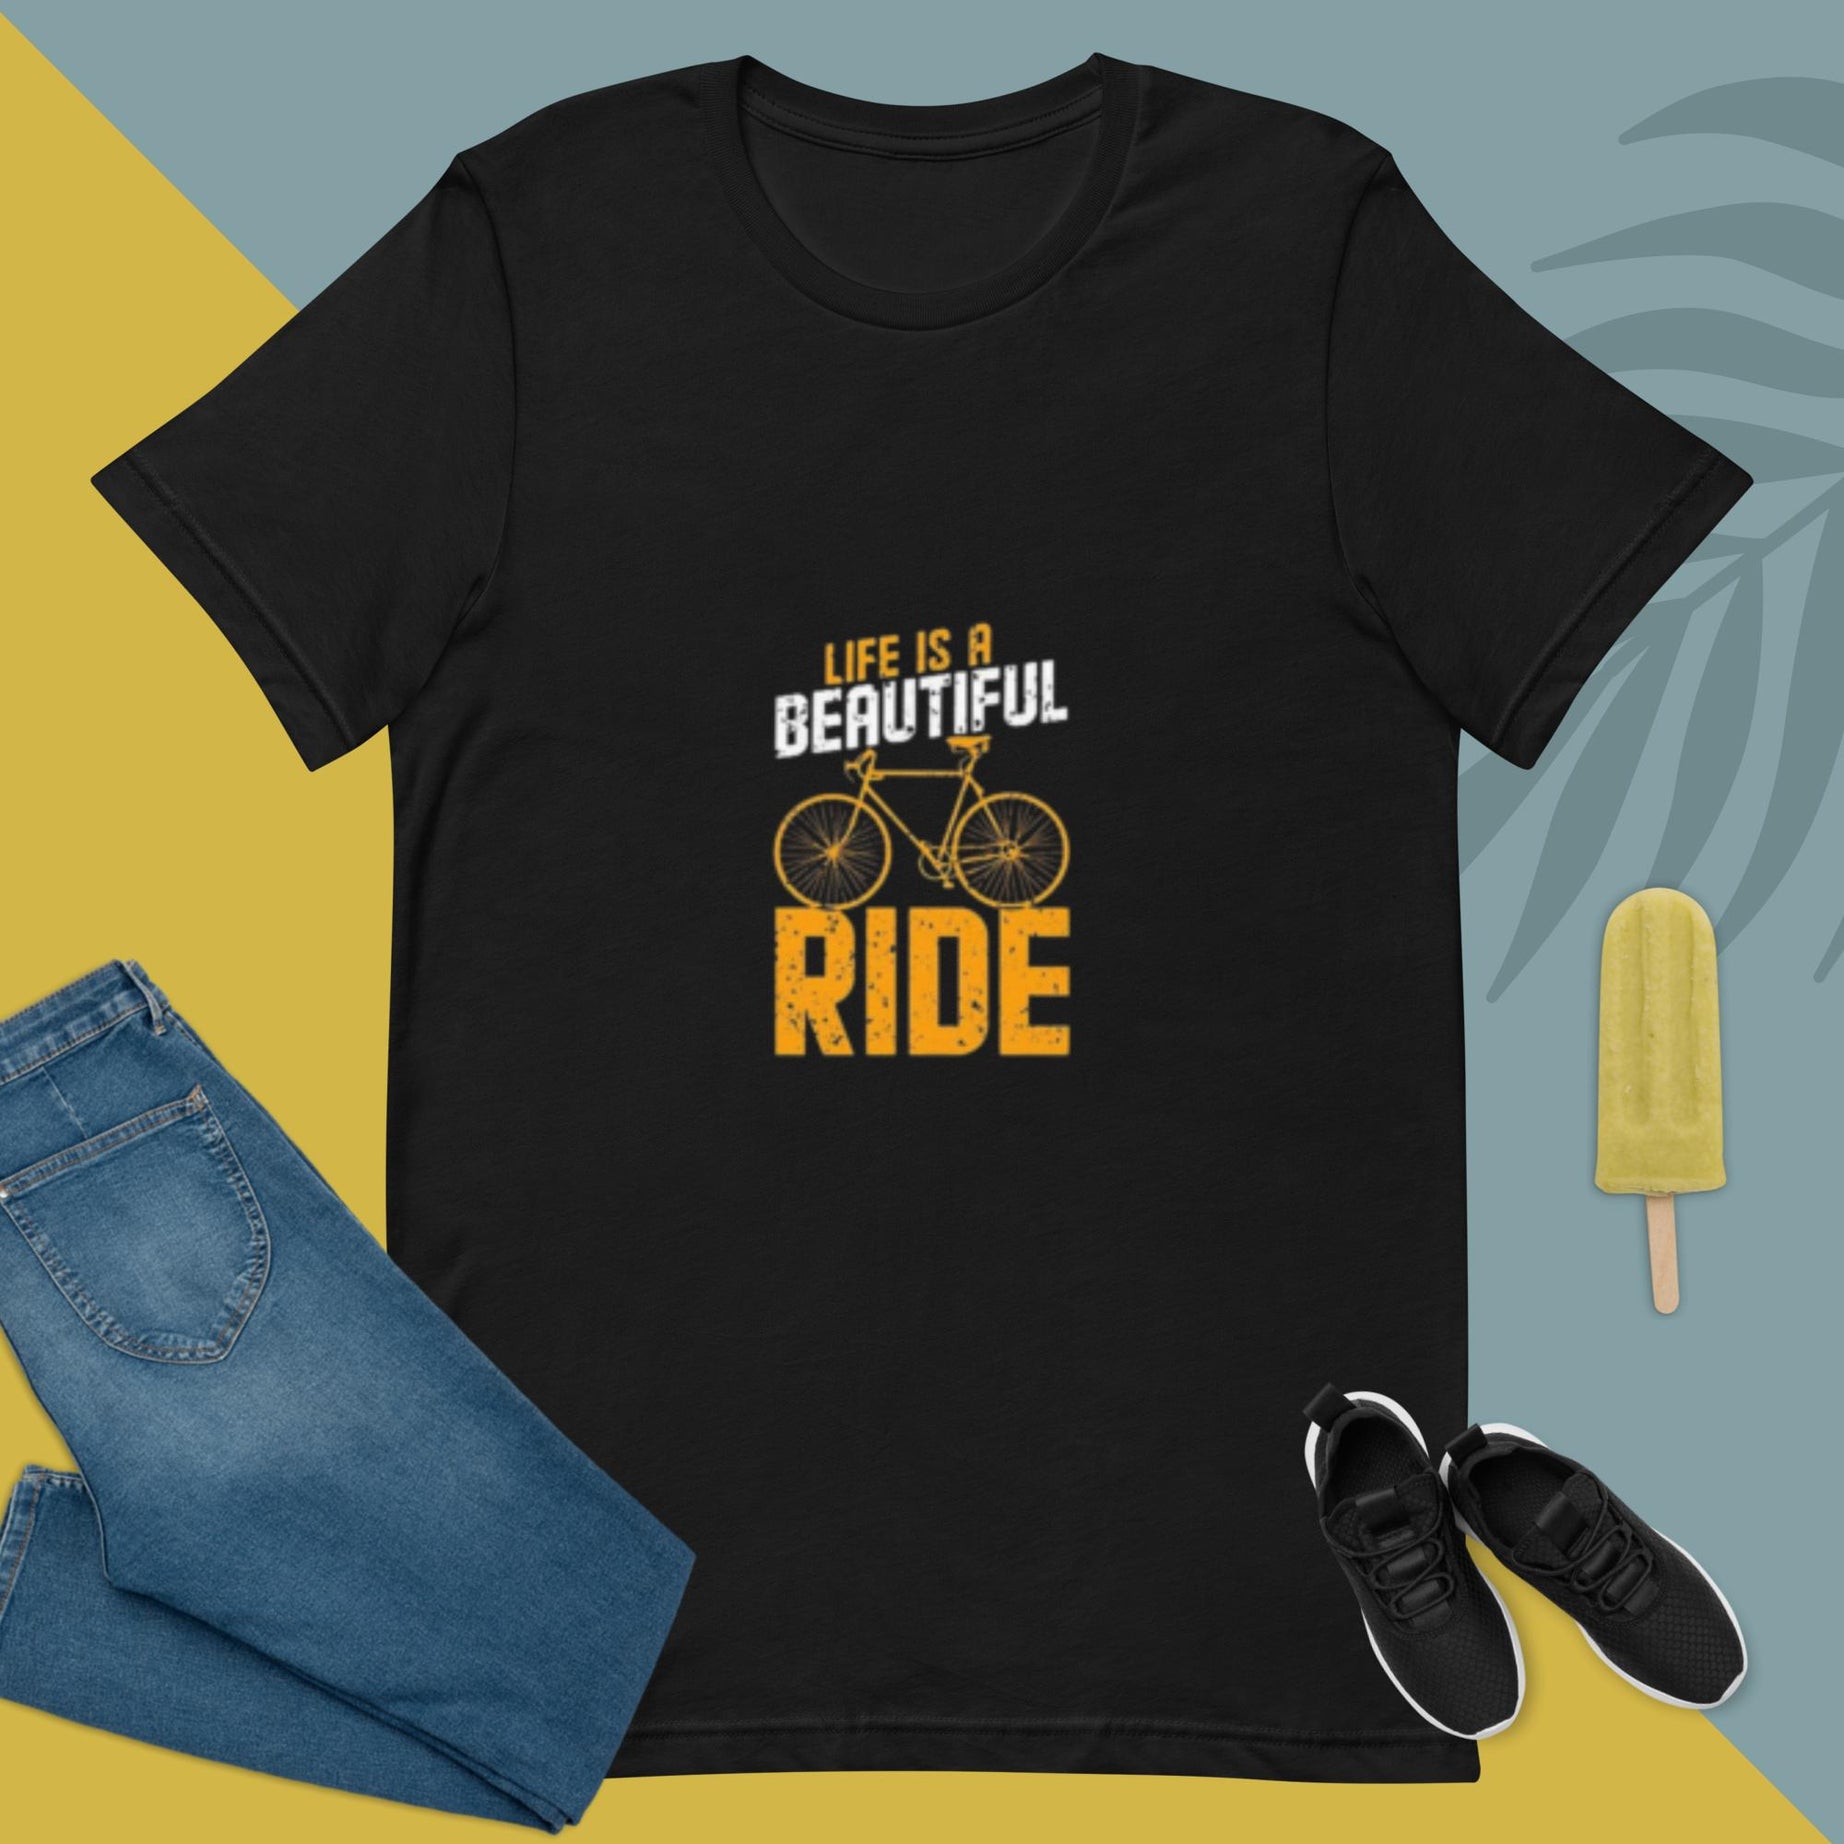 LIFE IS A BEAUTIFUL RIDE T-SHIRT